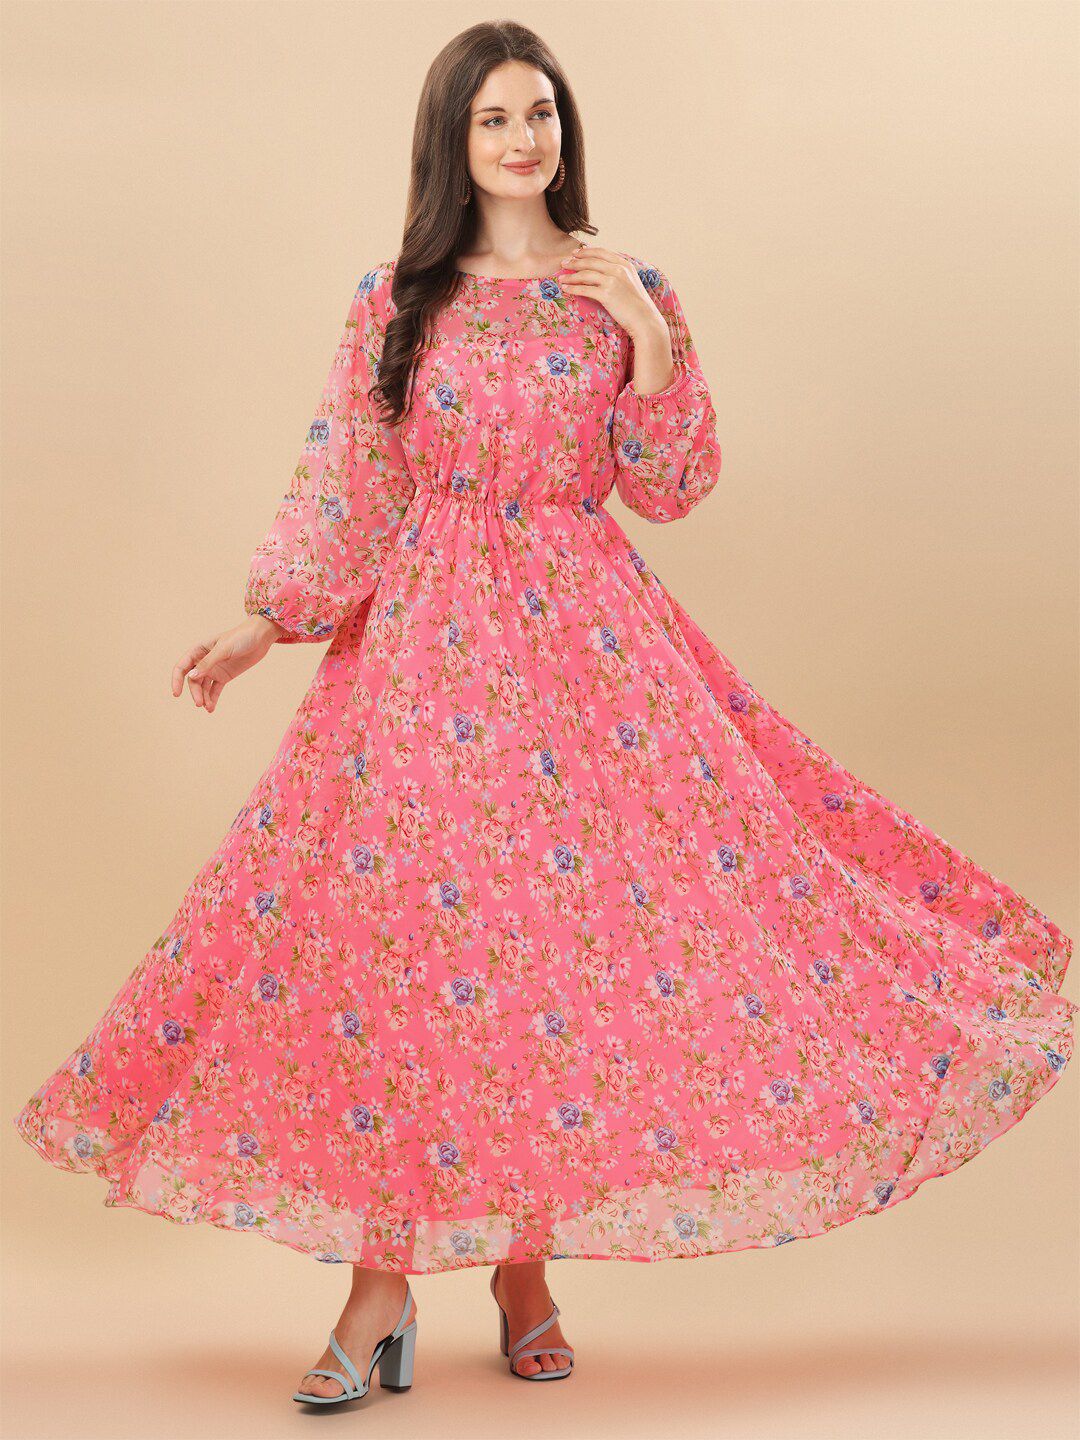 Vidraa Western Store Pink Floral Georgette Maxi Dress Price in India